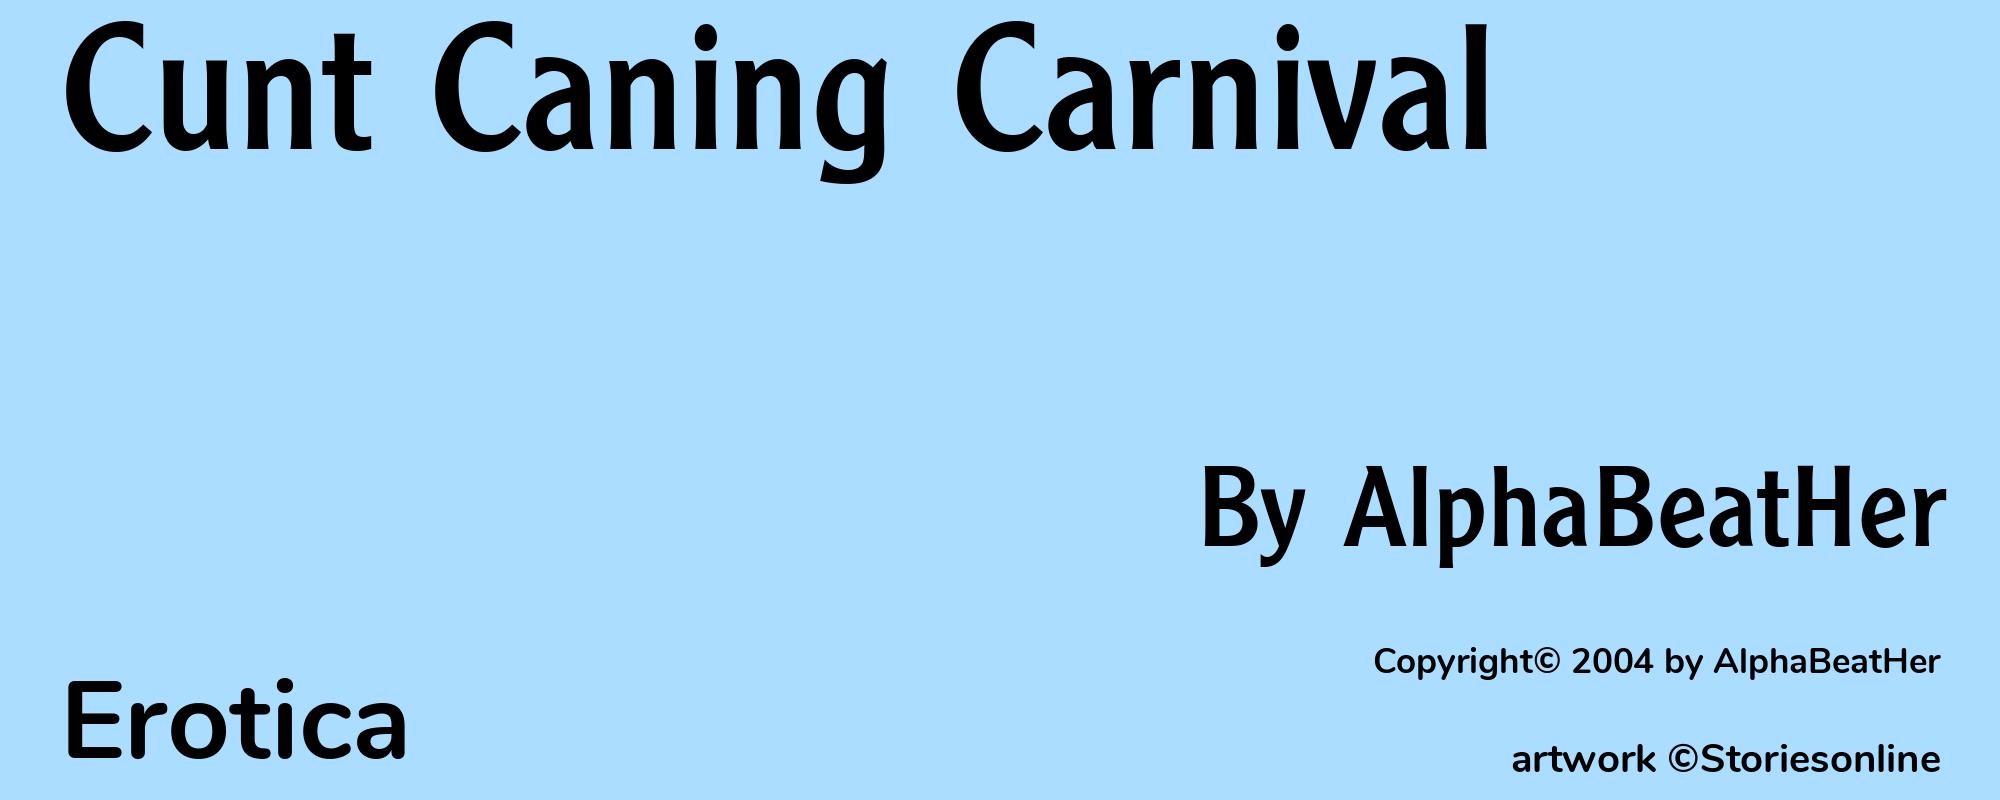 Cunt Caning Carnival - Cover